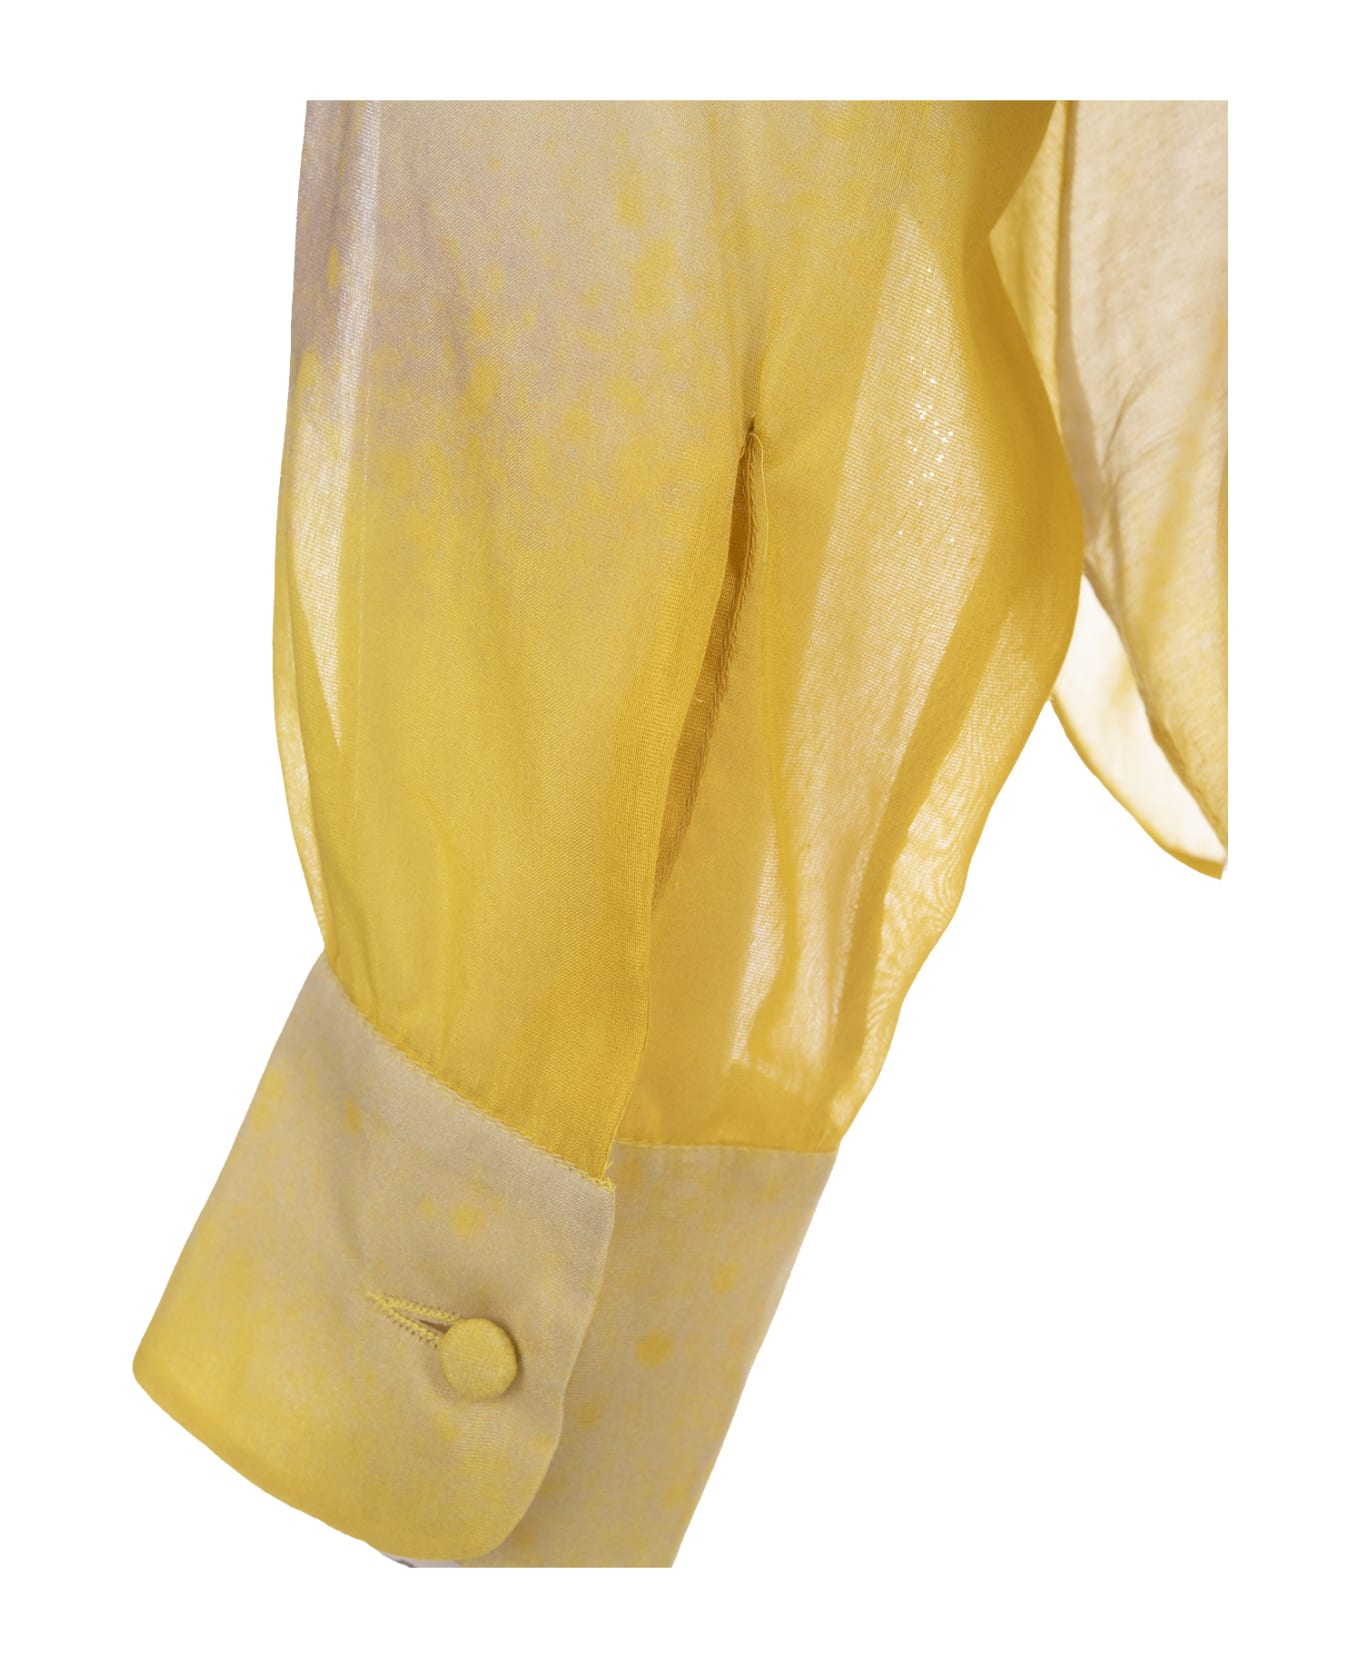 Gianluca Capannolo Yellow Silk Shirt With Gathering - Yellow ブラウス